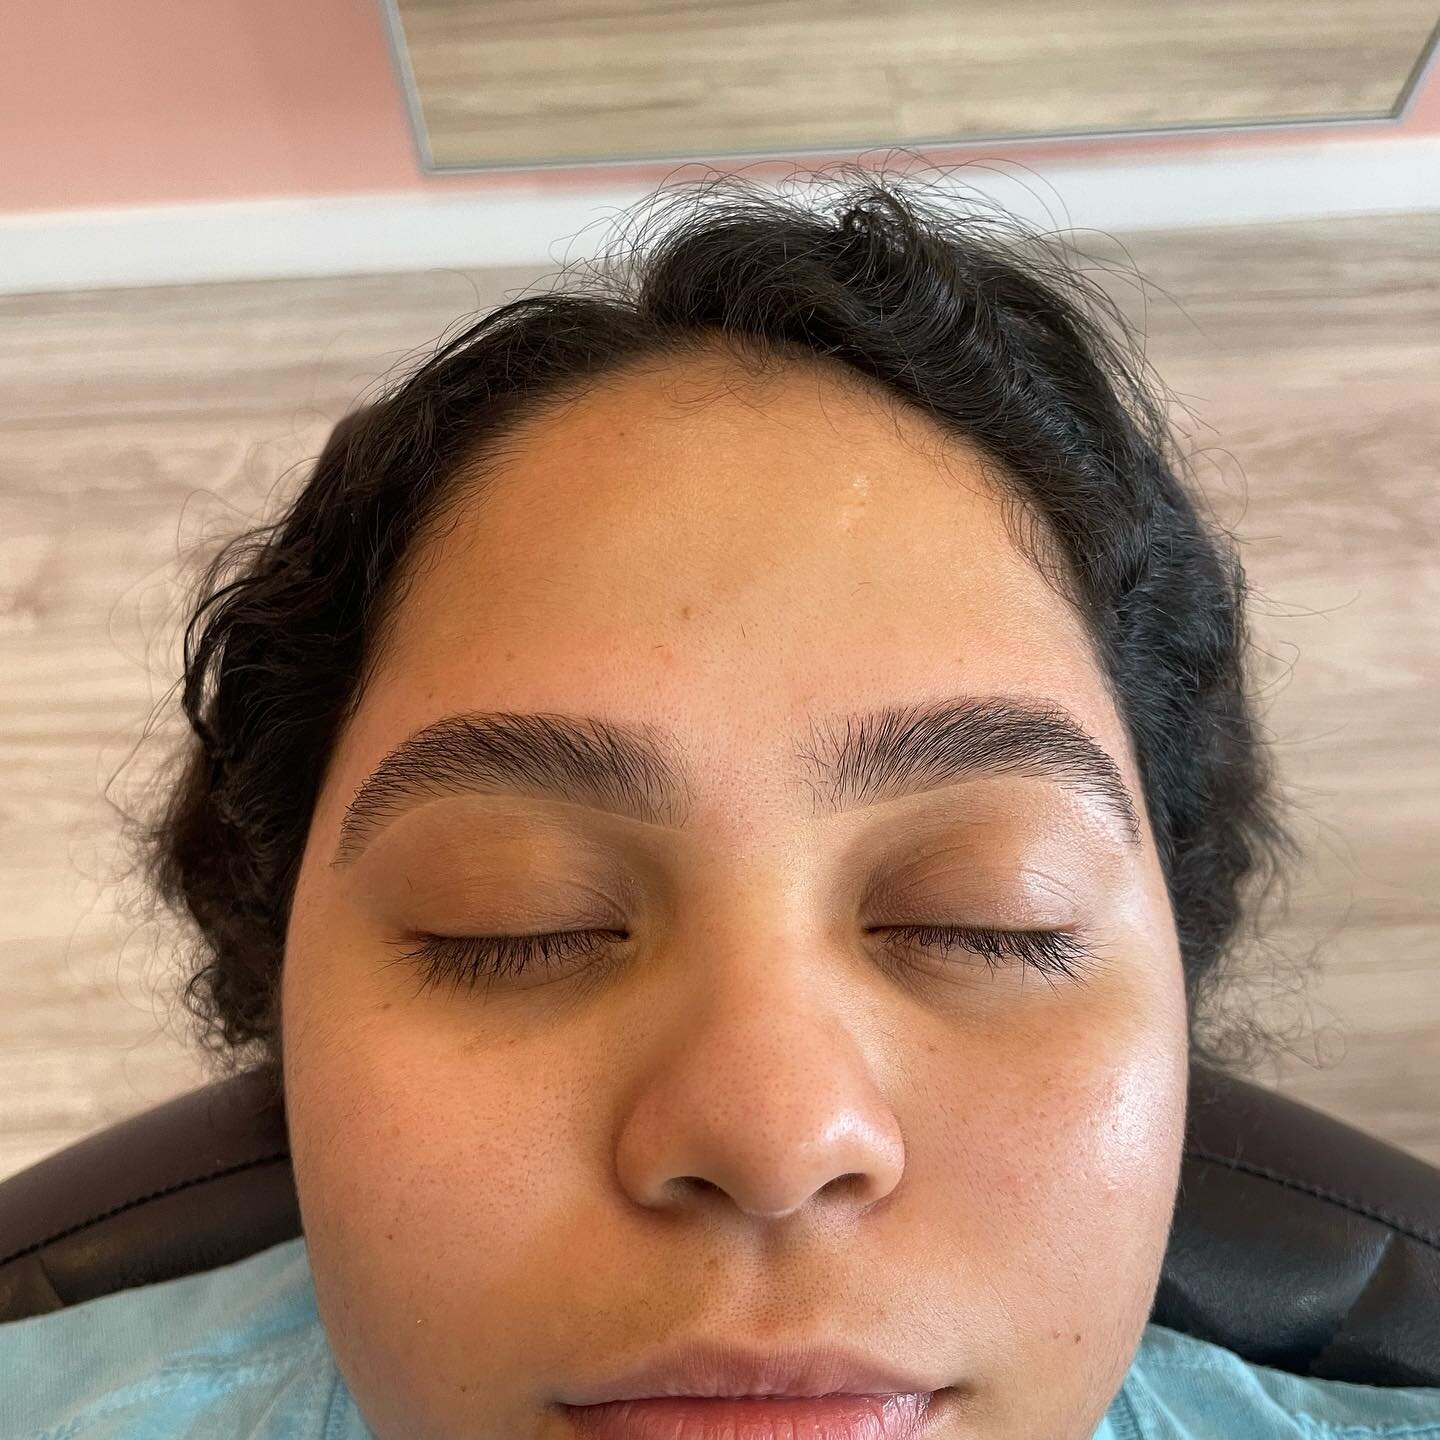 In Thick Brows we Trust 💋 we are all about keeping your natural shape &amp; while giving a clean sharp arch here at #JNBROW ⁣
⁣
⁣
⁣
⁣
⁣
⁣
⁣
⁣
#browwax #tulsabrows #tulsaeyebrows #eyebrows #jnbrow #brows #waxing #softwax #archaddict